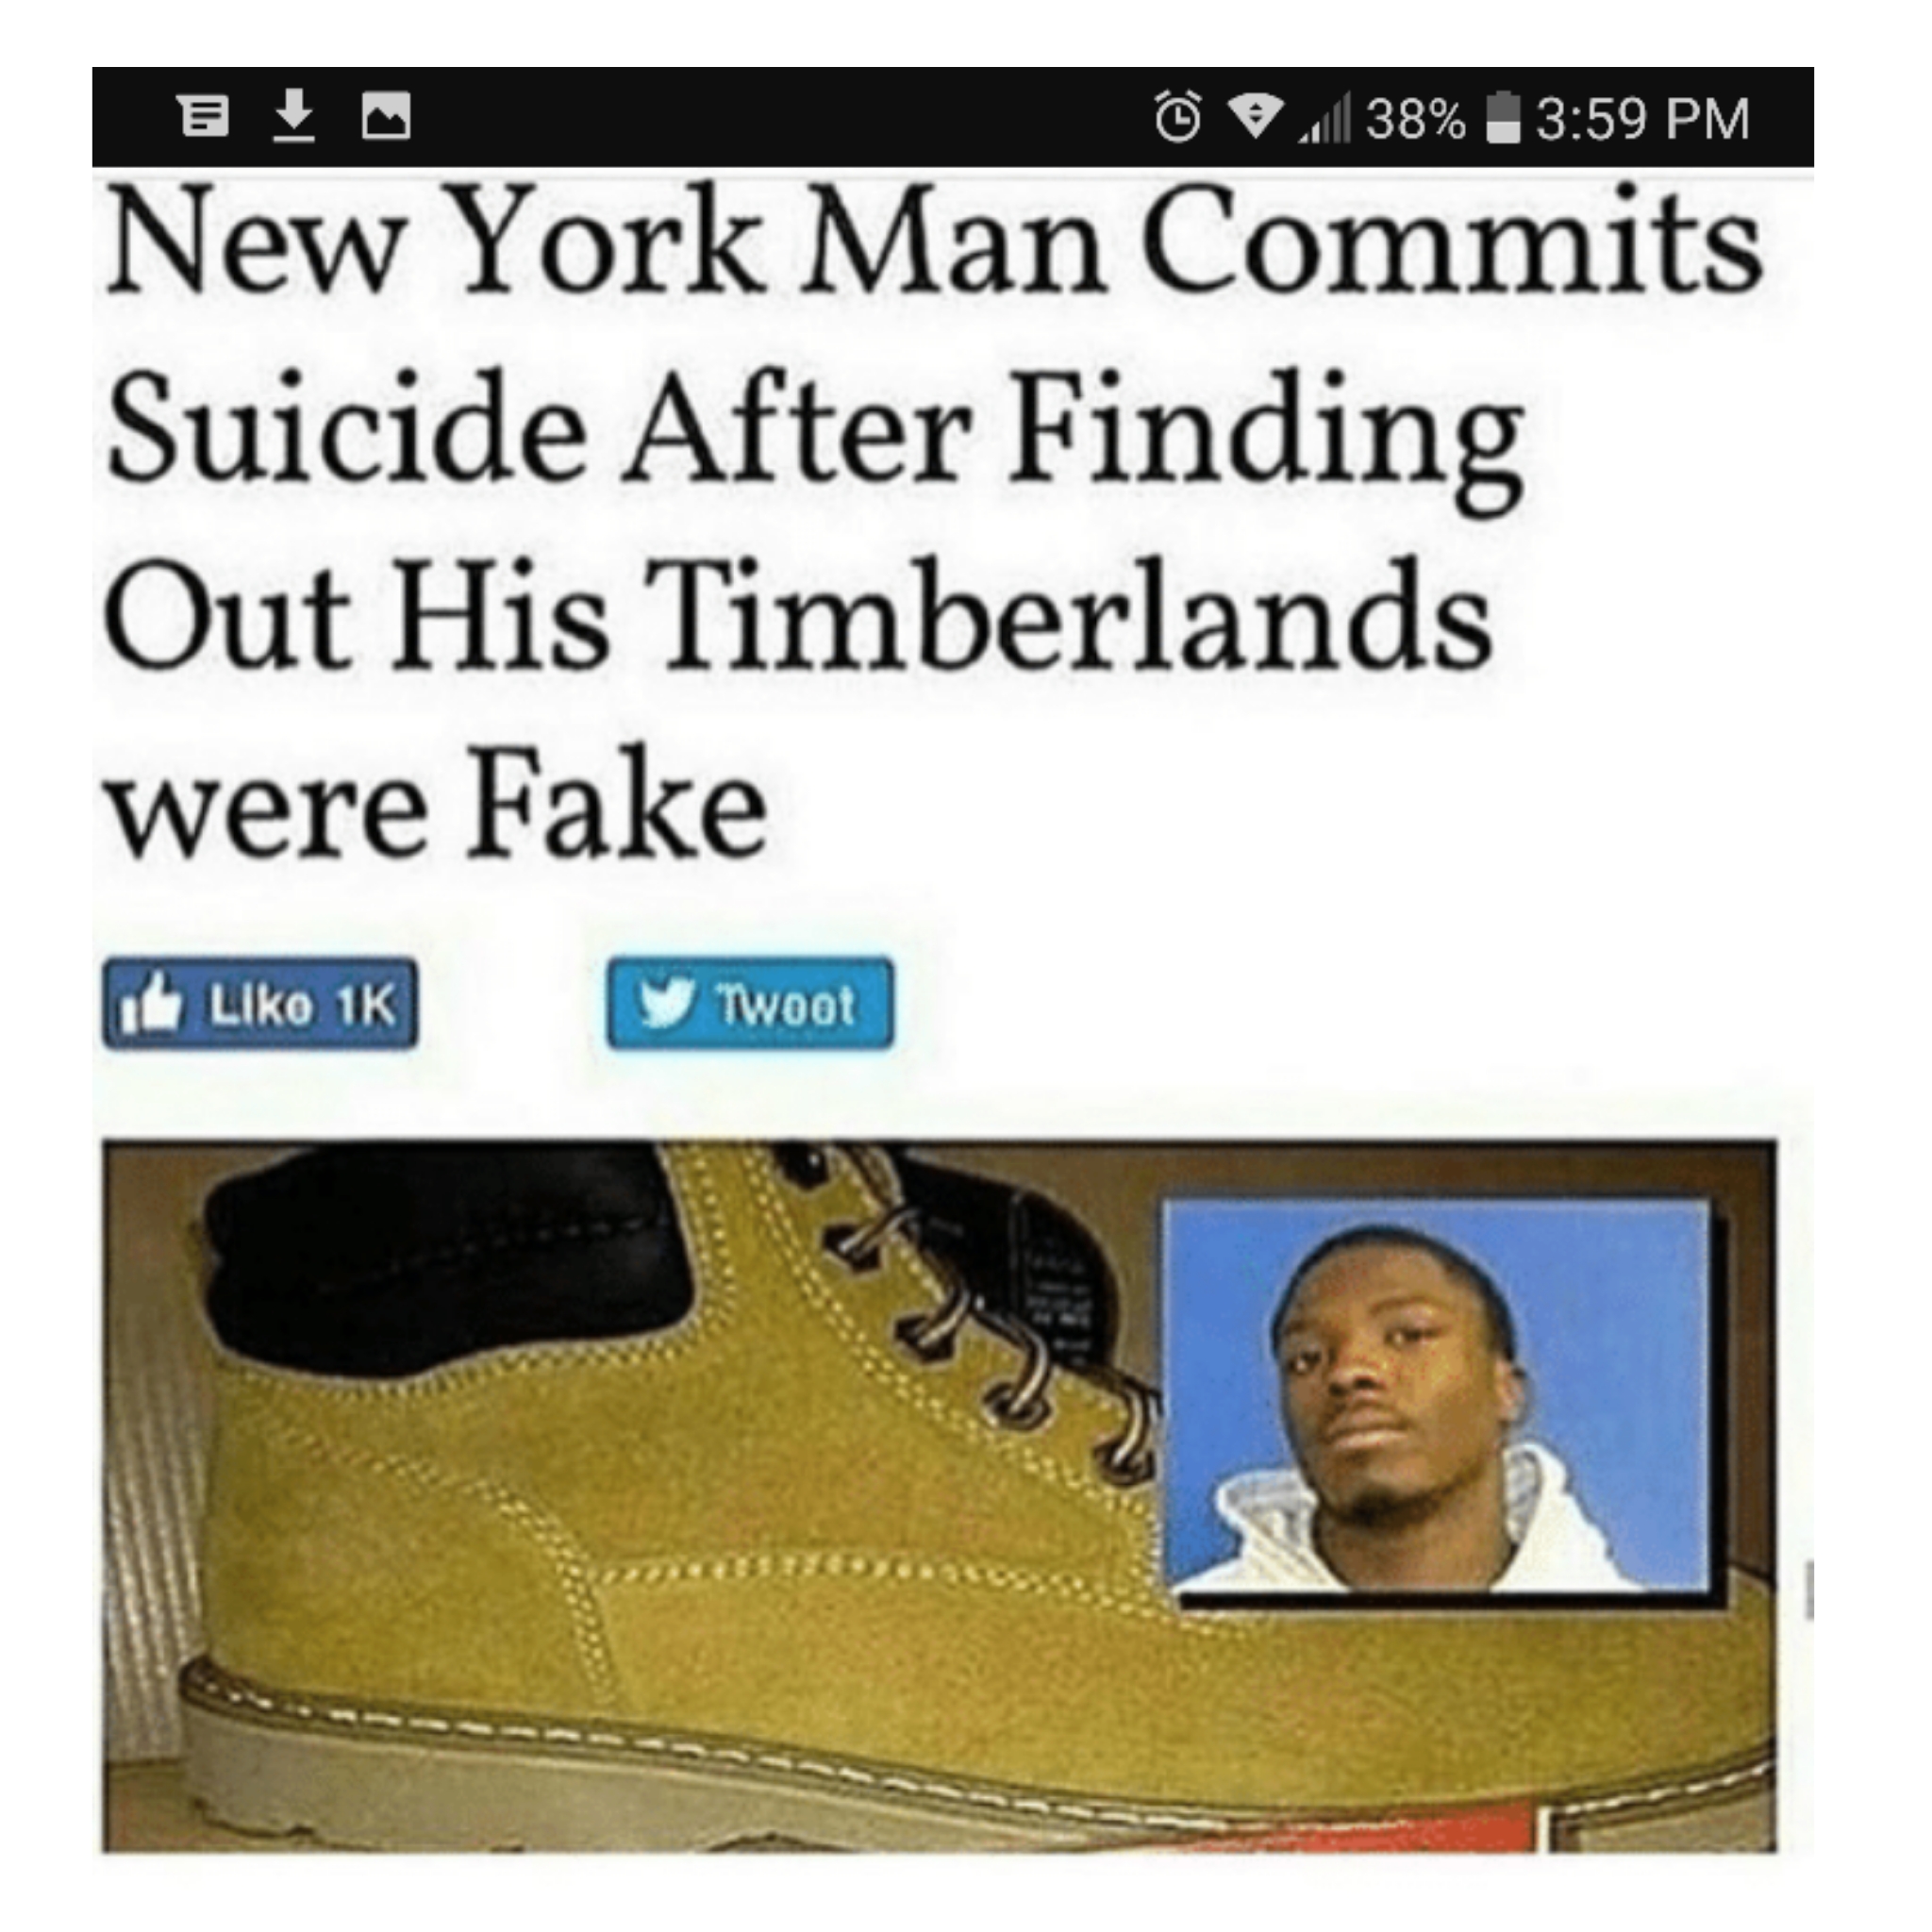 new york man commits suicide after finding out his timberlands were fake - 9.38% New York Man Commits Suicide After Finding Out His Timberlands were Fake Liko 1K Twood